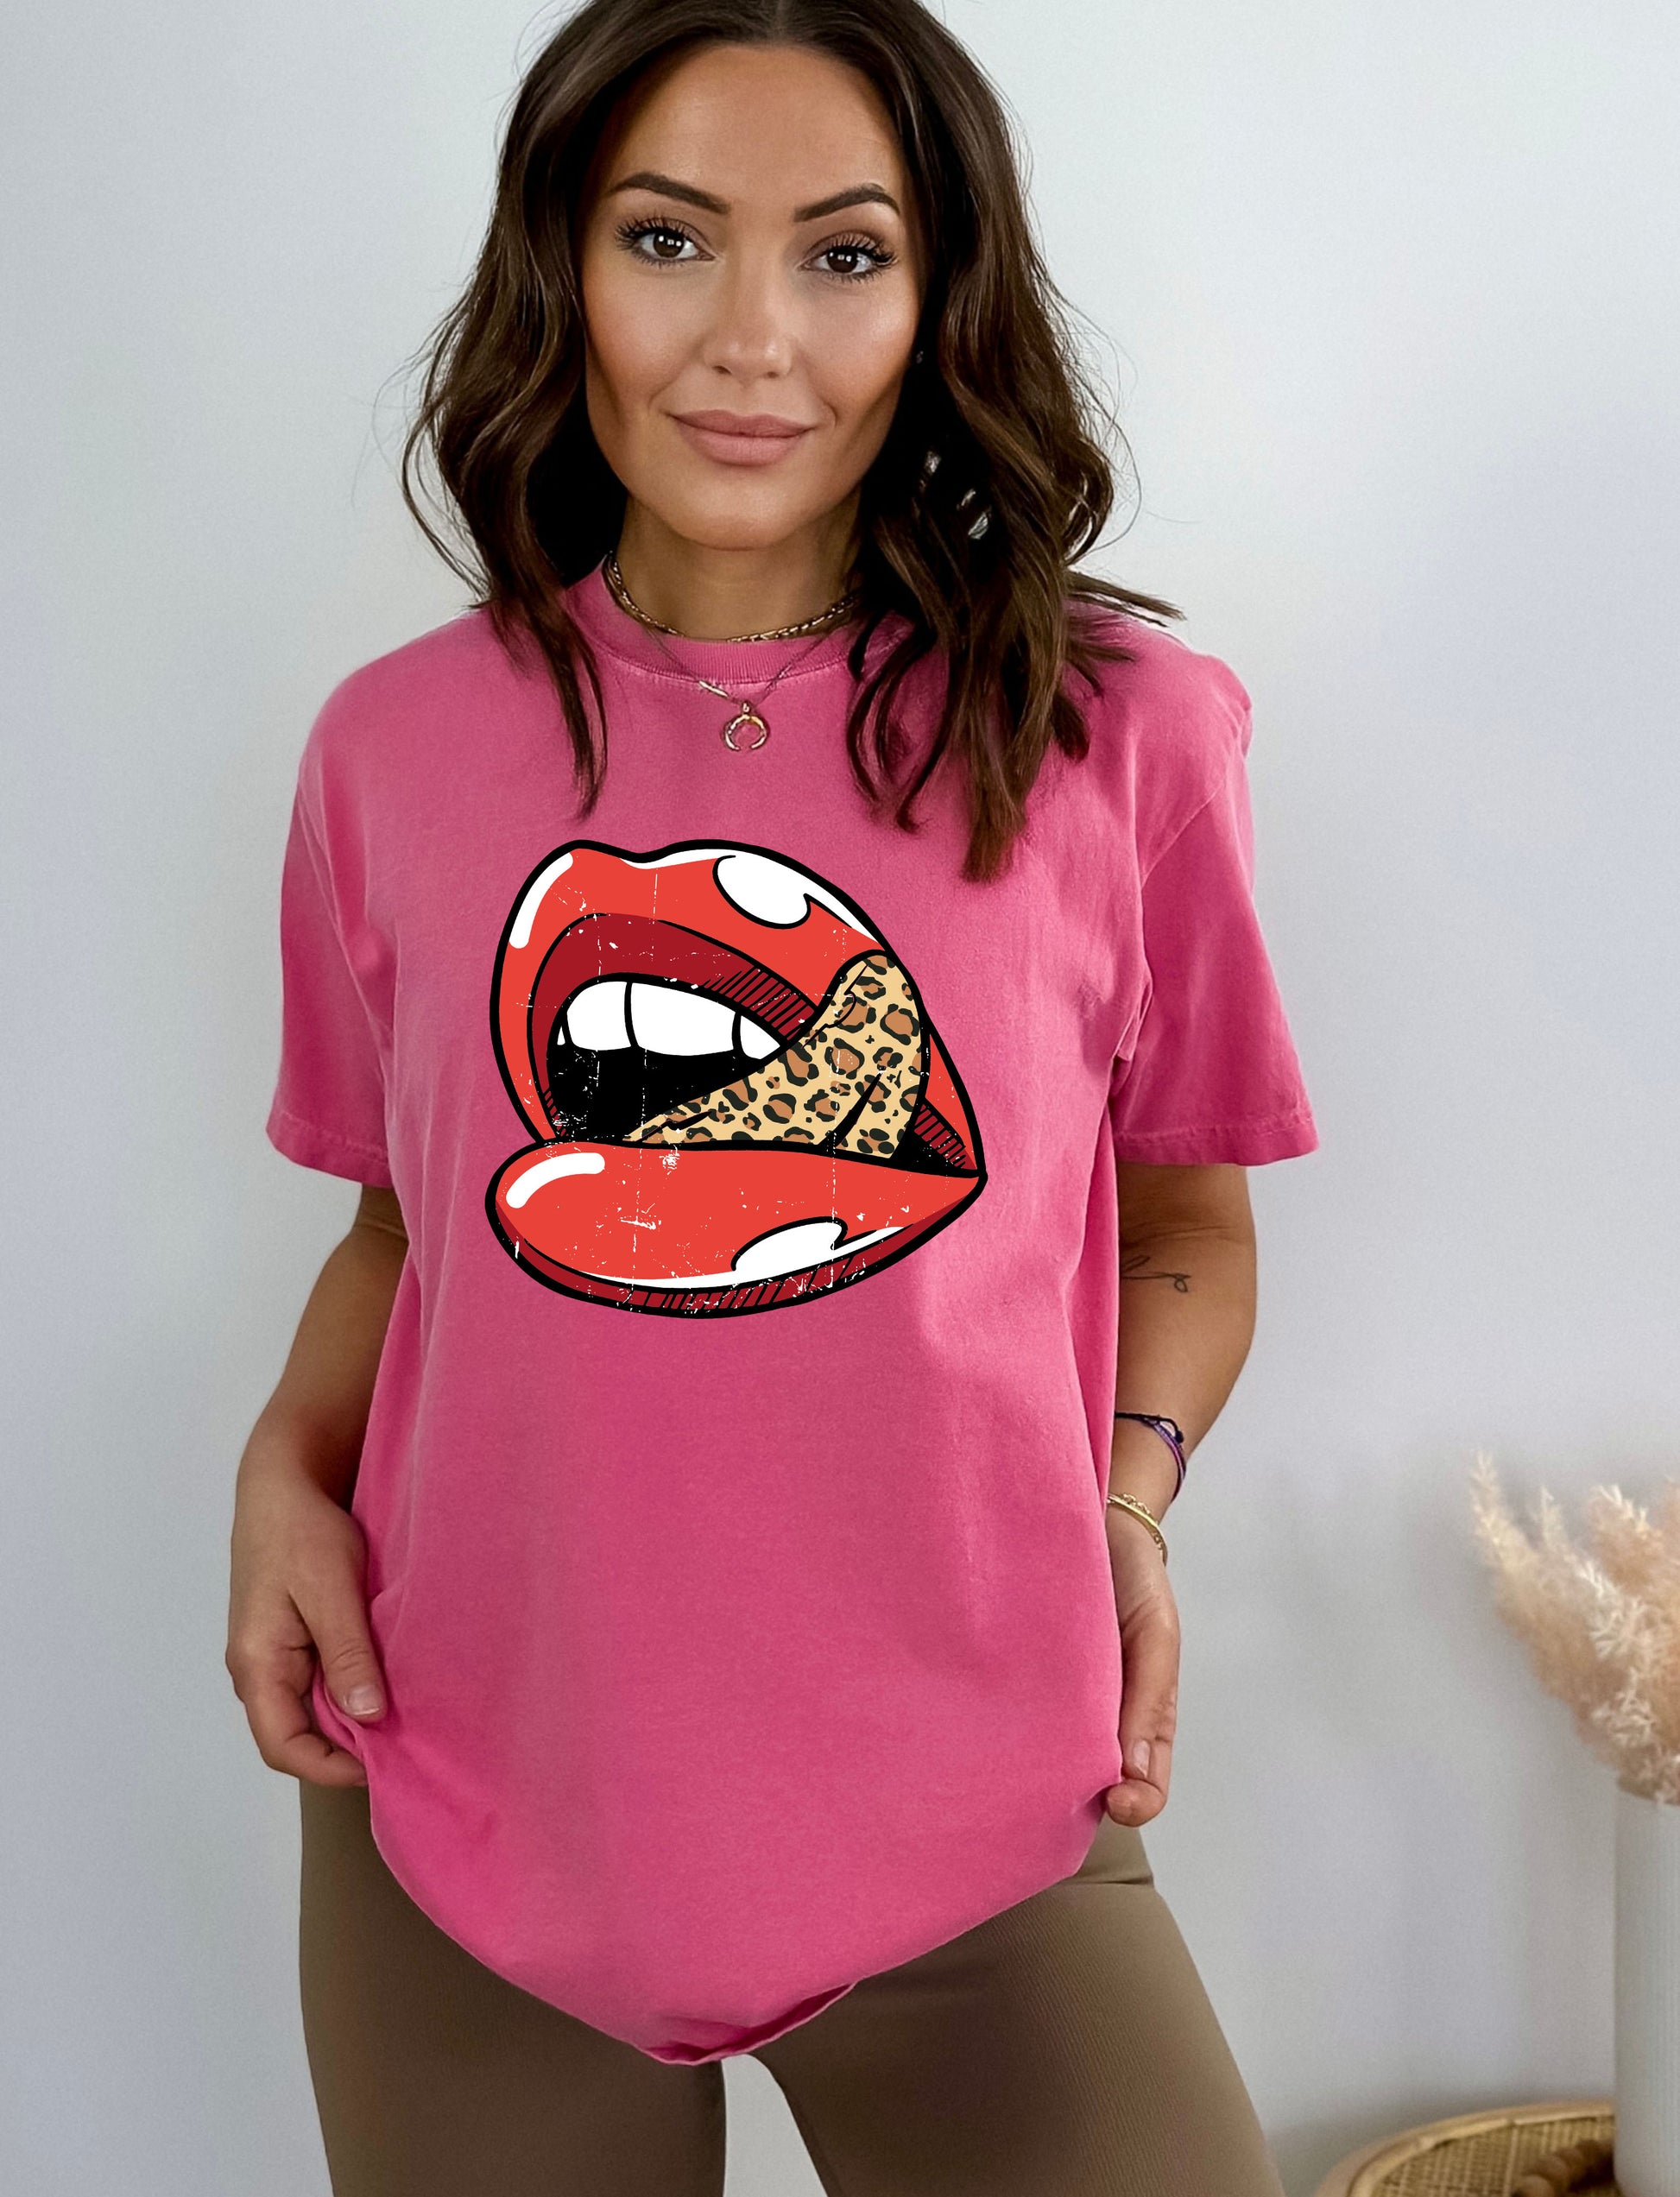 The Rolling Stones Graphic Tee, Vintage Rolling Stones Shirt, Comfort Colors Tee-newamarketing